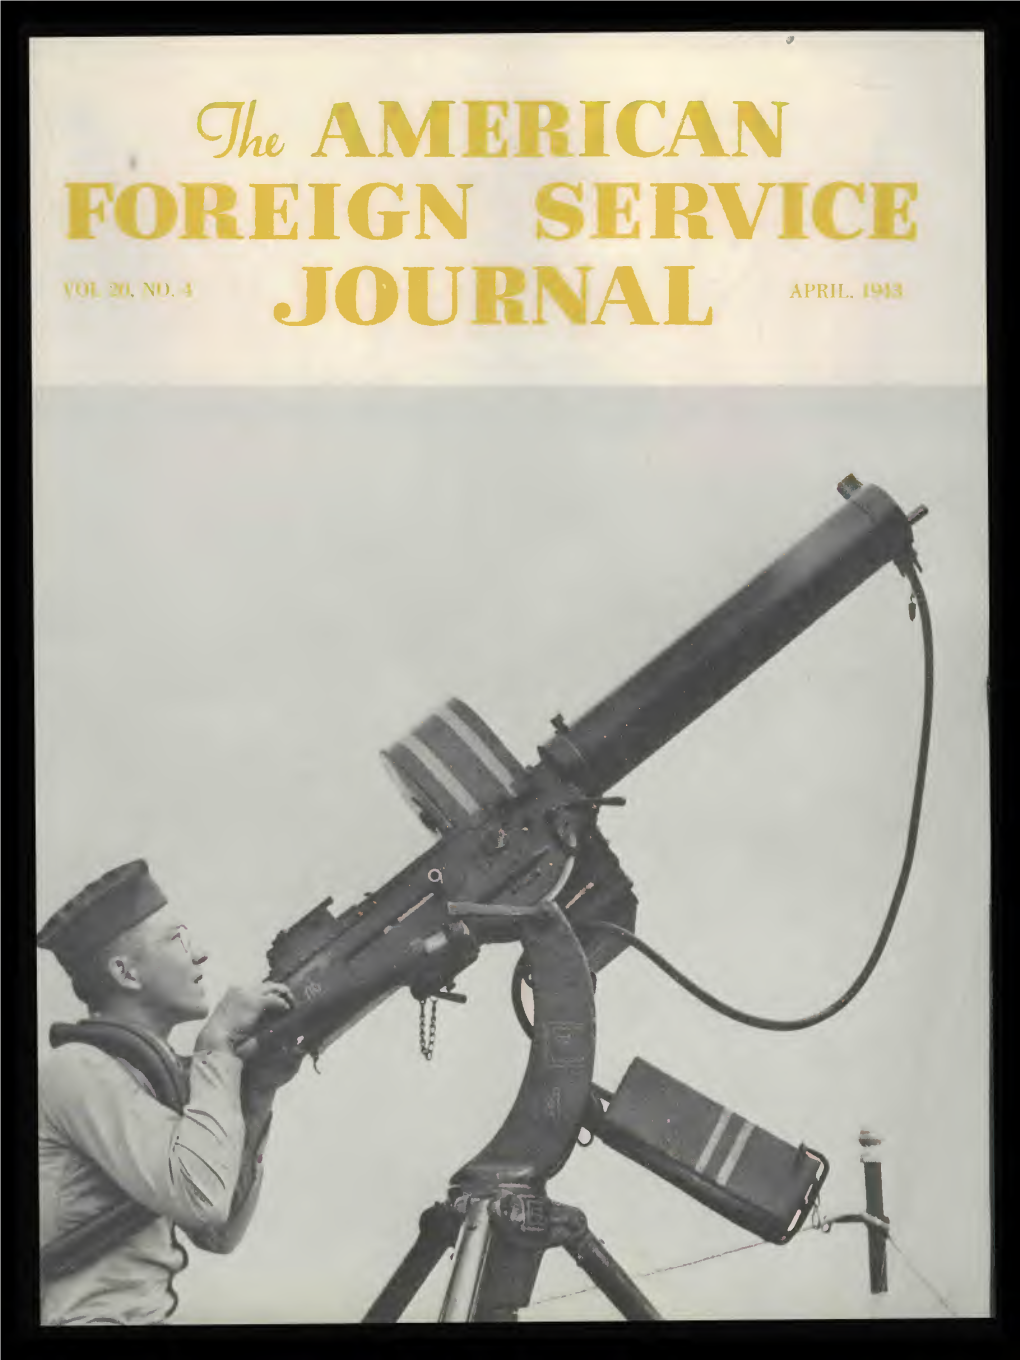 The Foreign Service Journal, April 1943